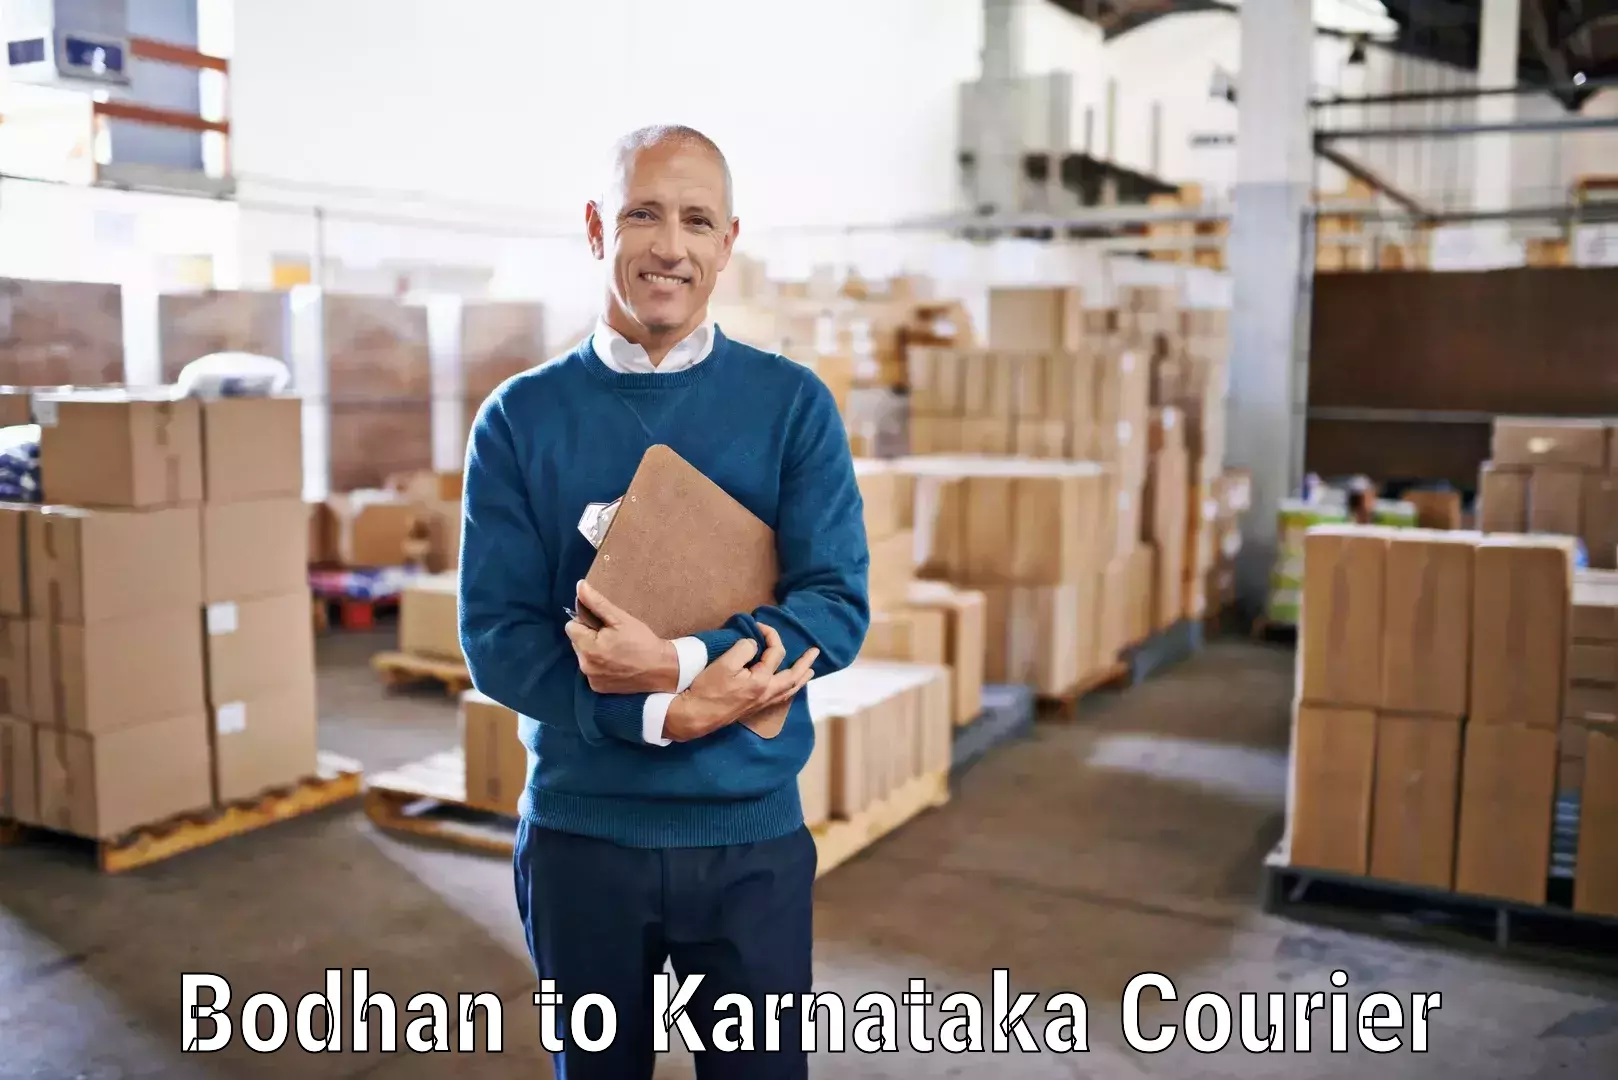 Overnight delivery in Bodhan to Karnataka